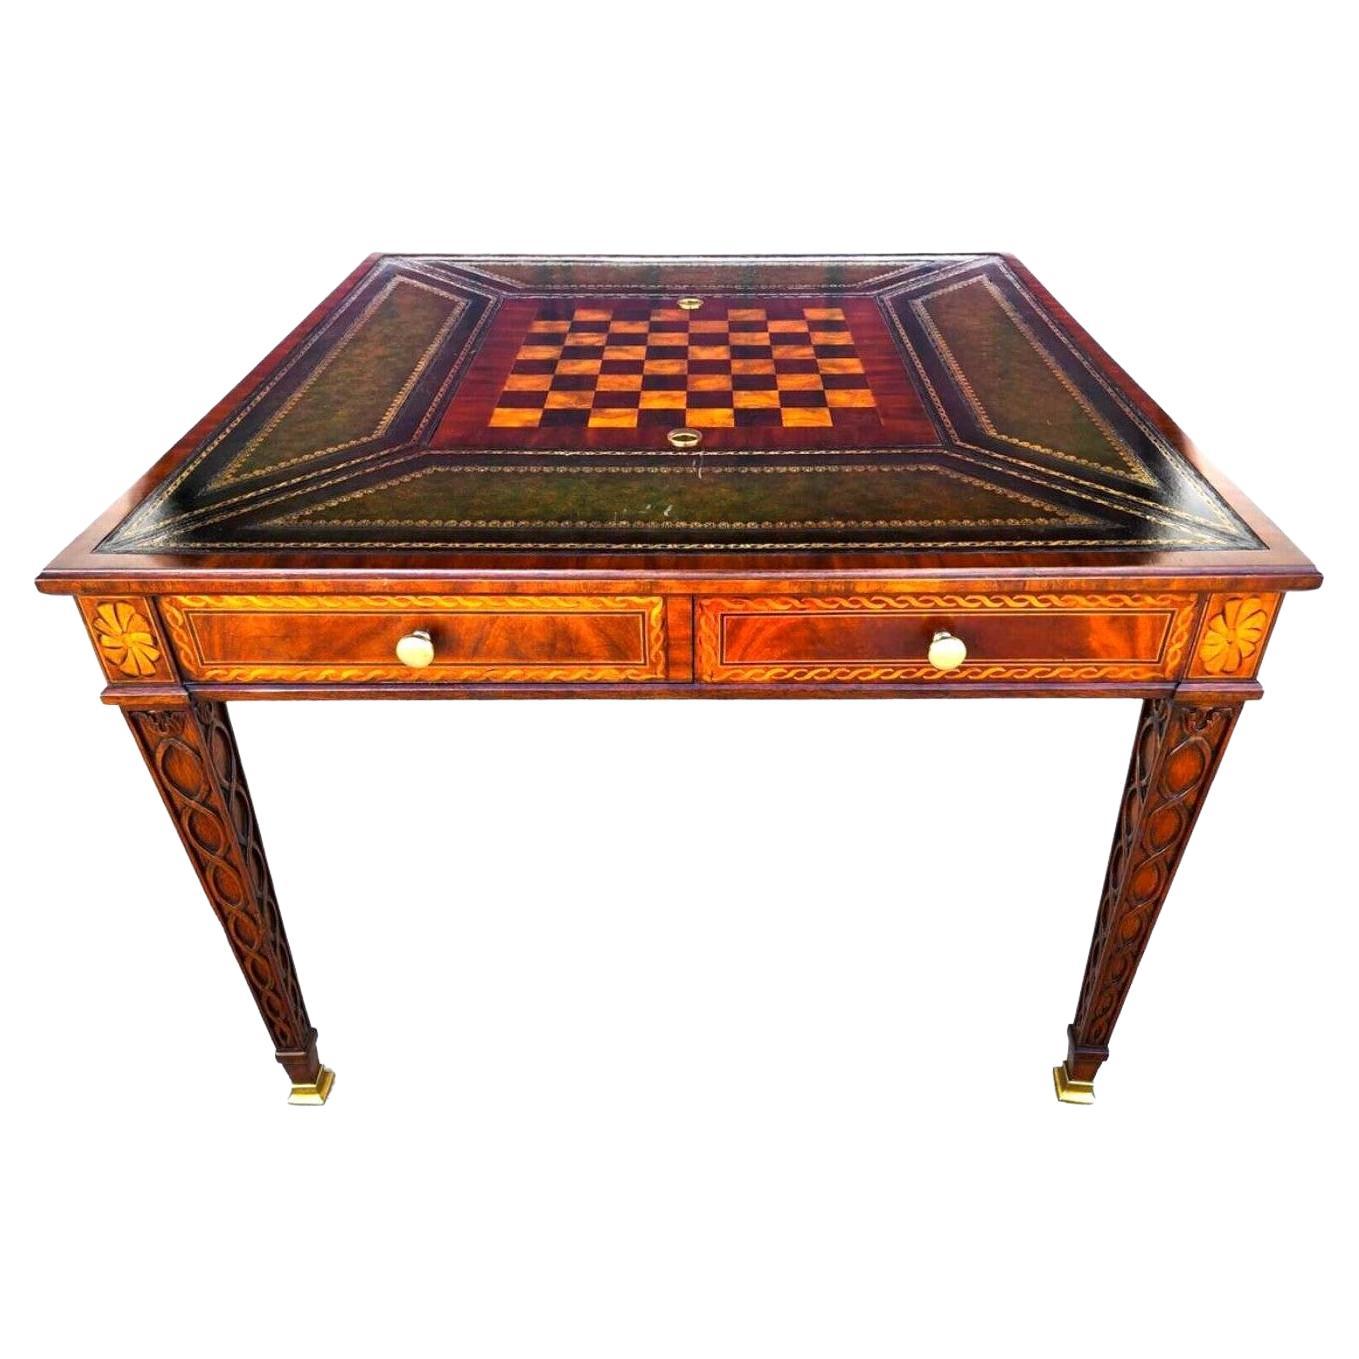 Vintage Game Table by Maitland Smith